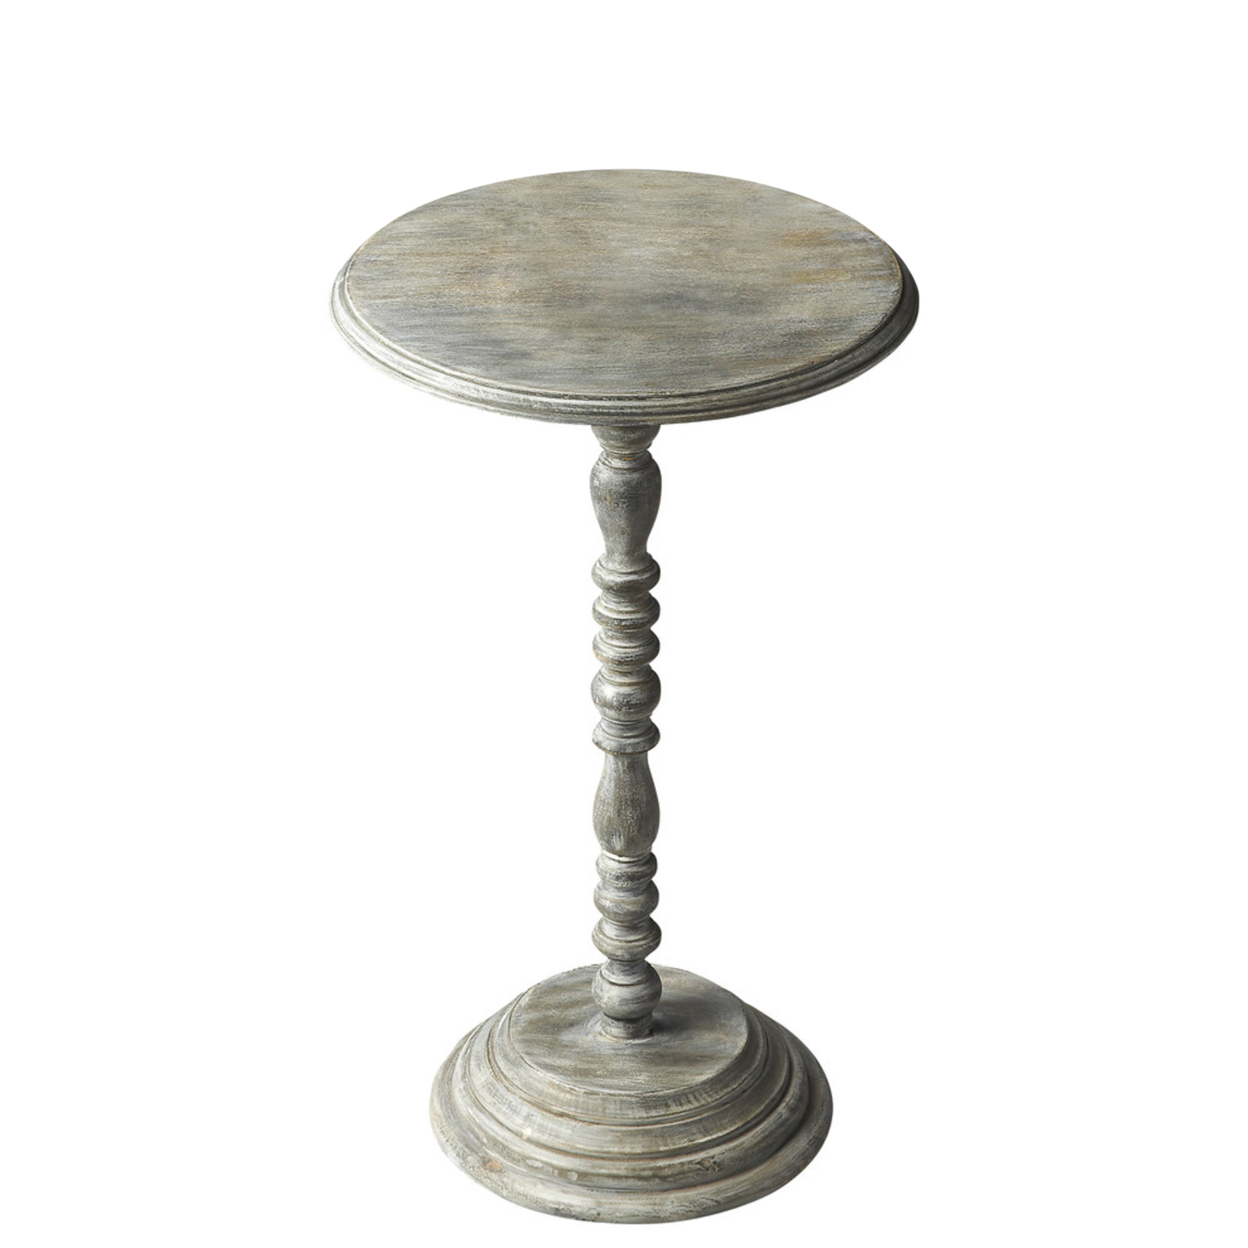 Butler Specialty Company Dani Solid Wood Pedestal 16"W Accent Table - Gray - image 1 of 7